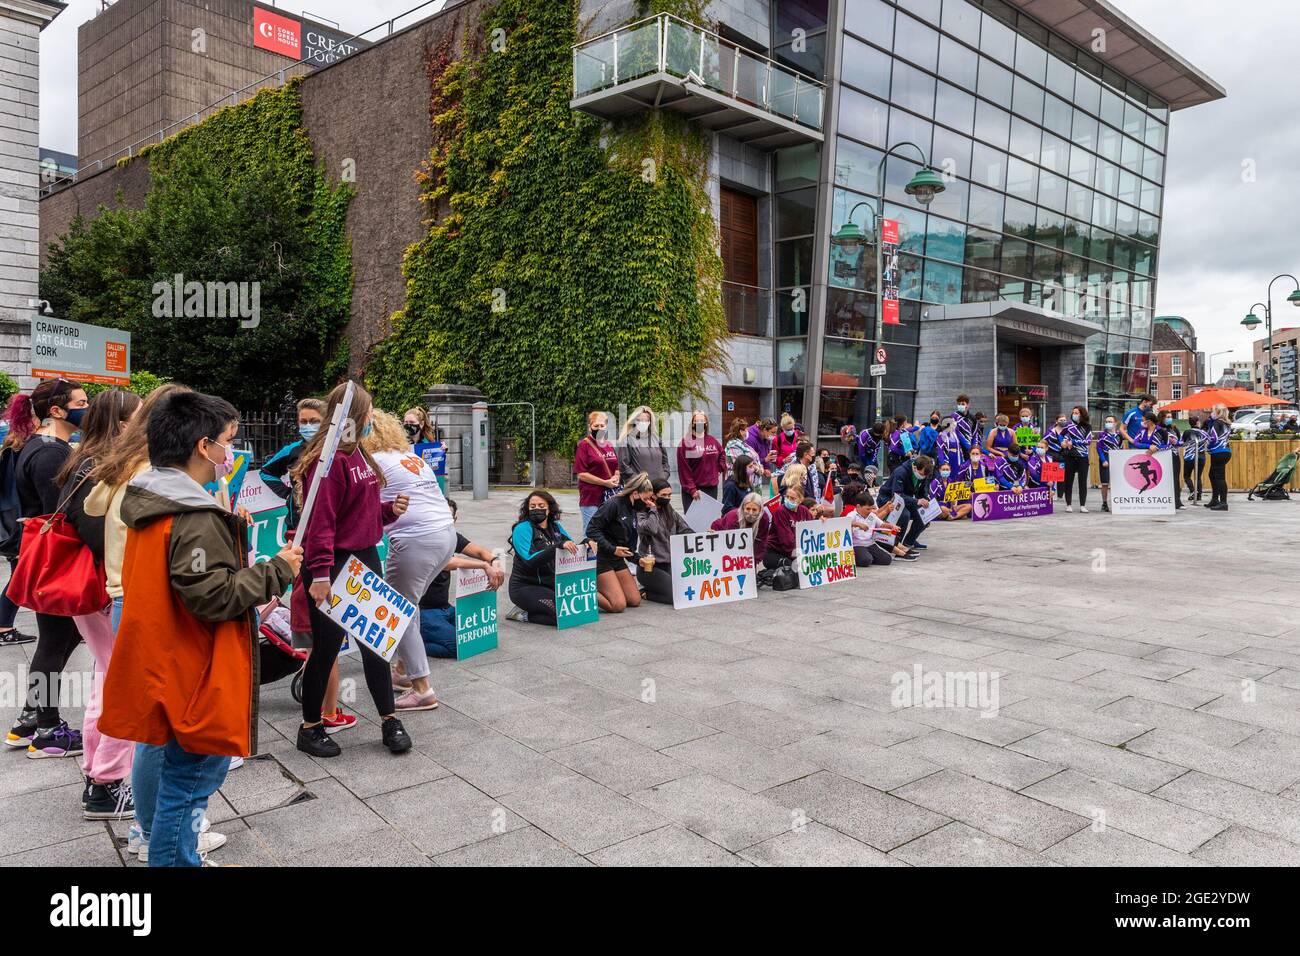 Cork, Ireland. 16th Aug, 2021. A large group of around 150 dancers, actors, musicians and students gathered outside the Opera House in Cork this morning to protest at the lack of returning roadmap to their lessons after COVID. Protestors bemoaned the fact regular schools are operating and yet the performing arts have 'been left out'. Credit: AG News/Alamy Live News Stock Photo